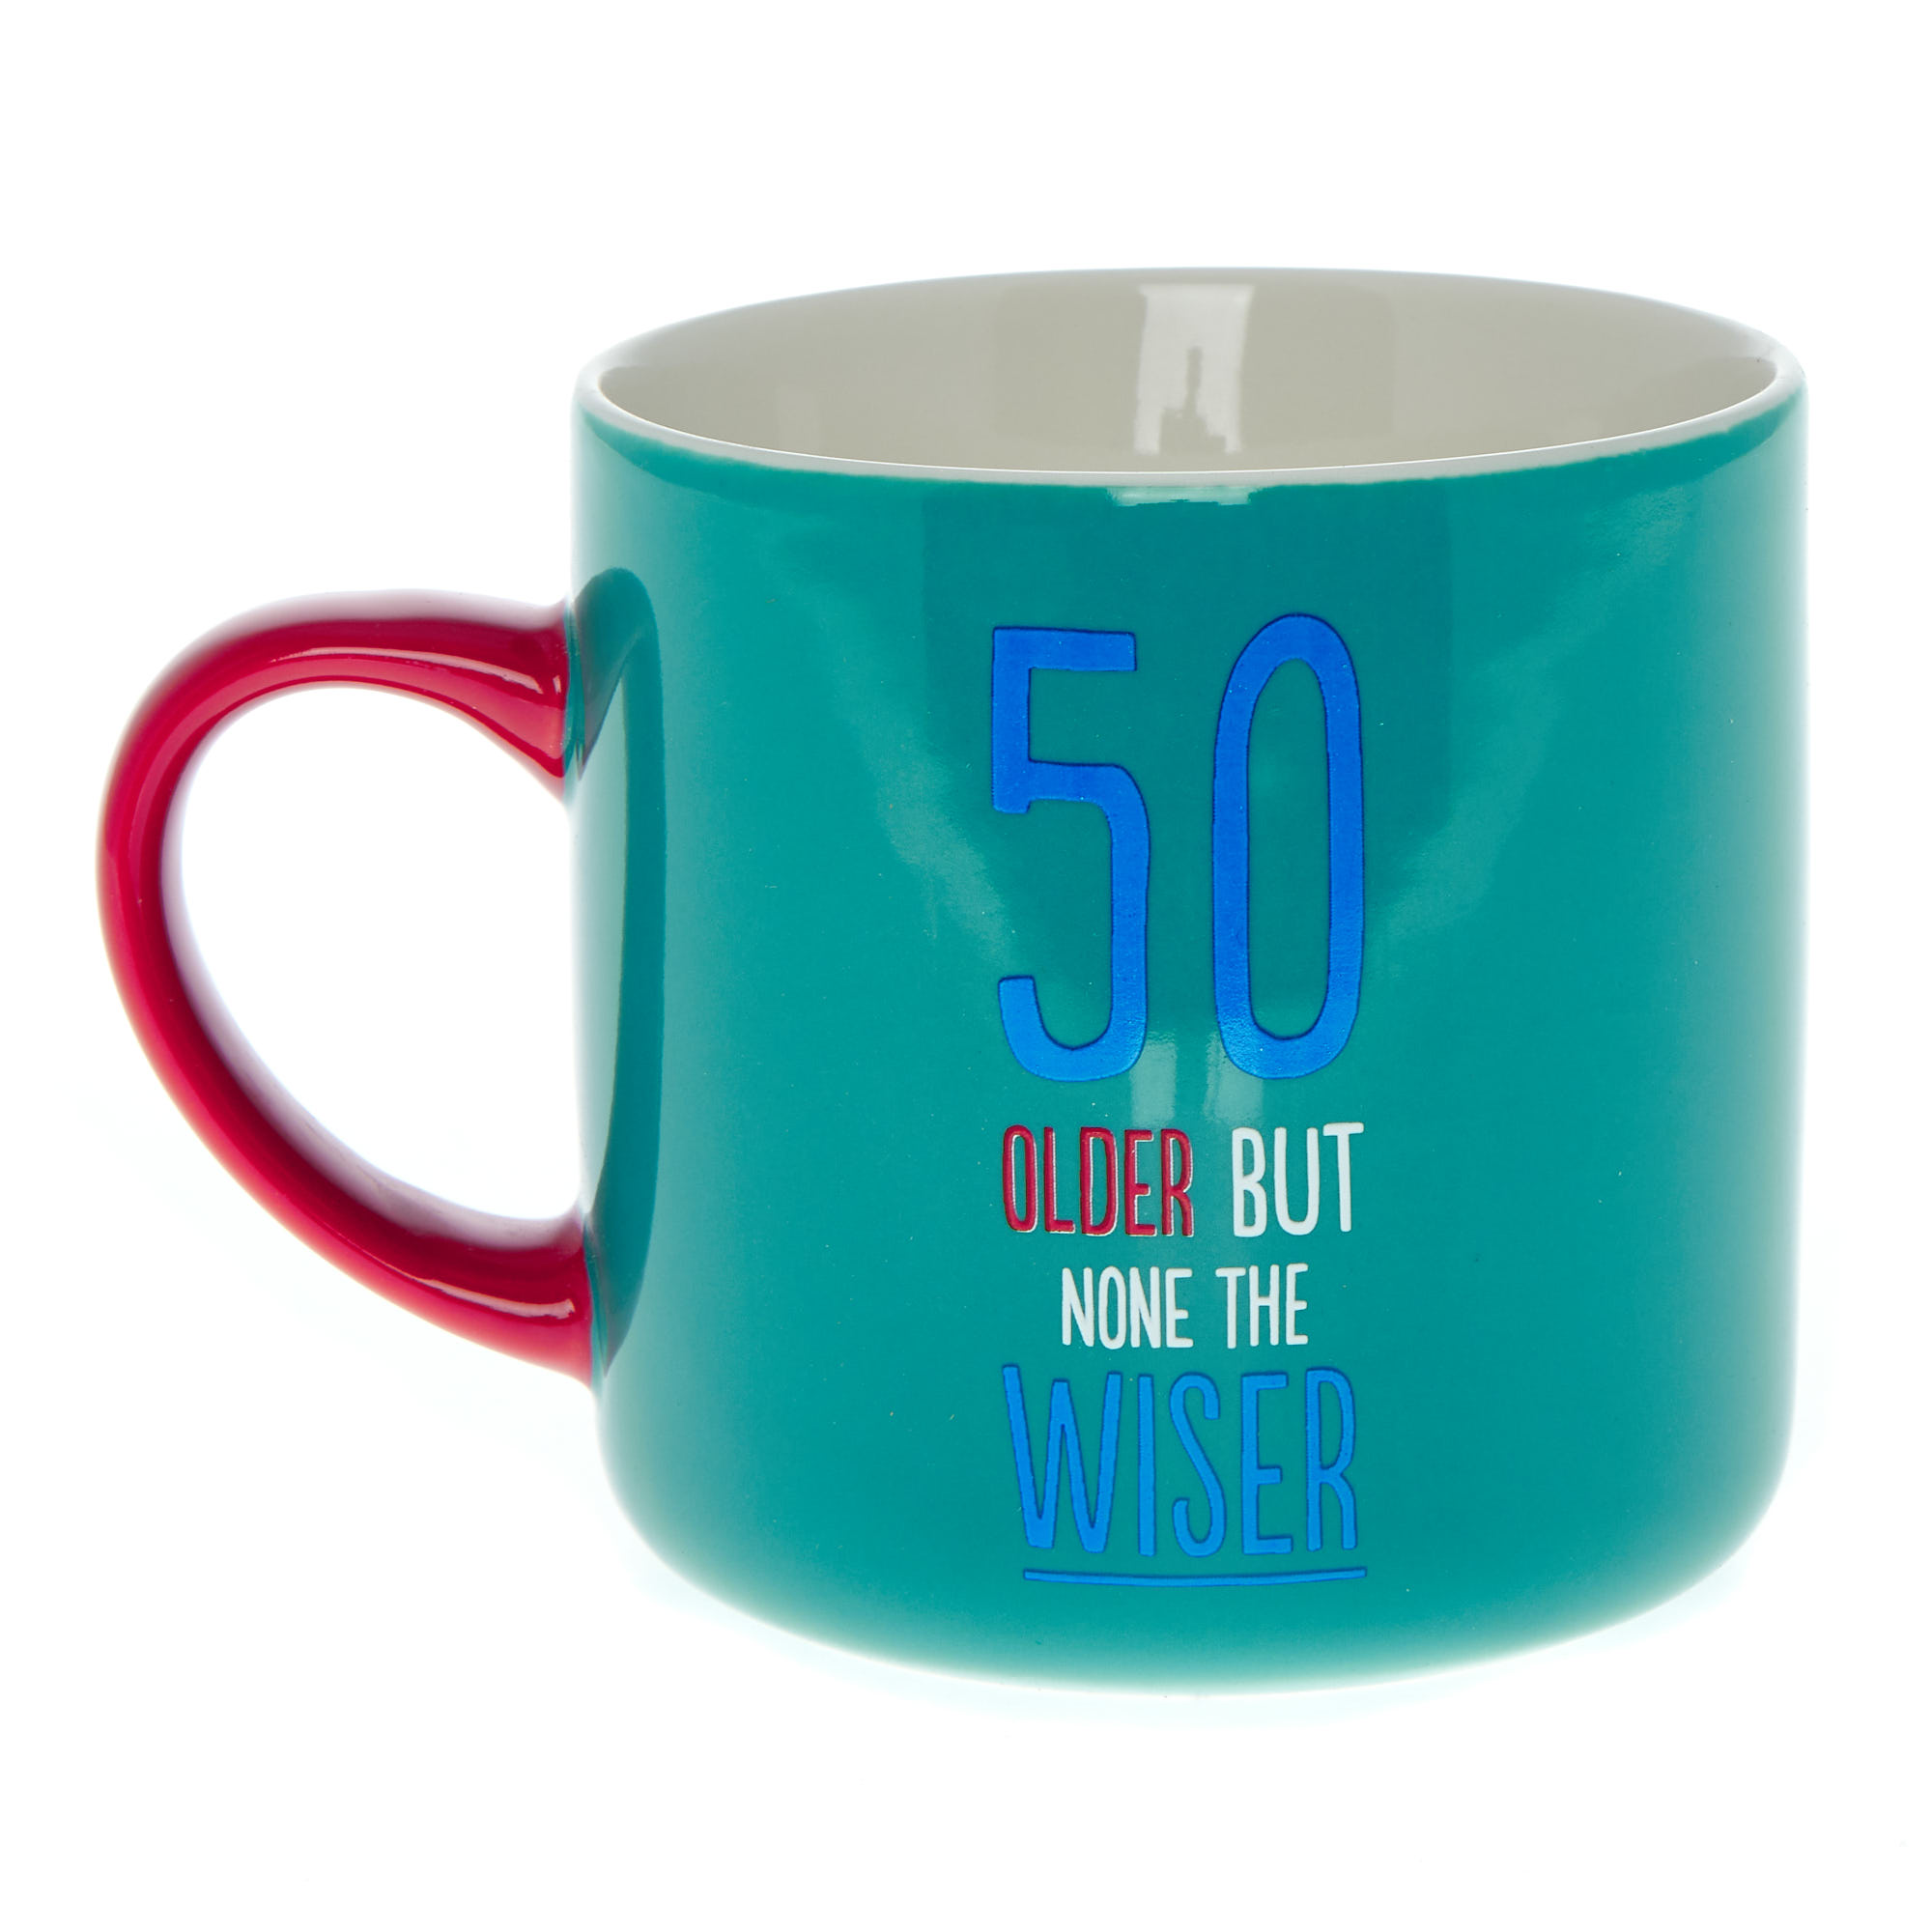 Buy None the Wiser 50th Birthday Mug for GBP 3.99 | Card Factory UK